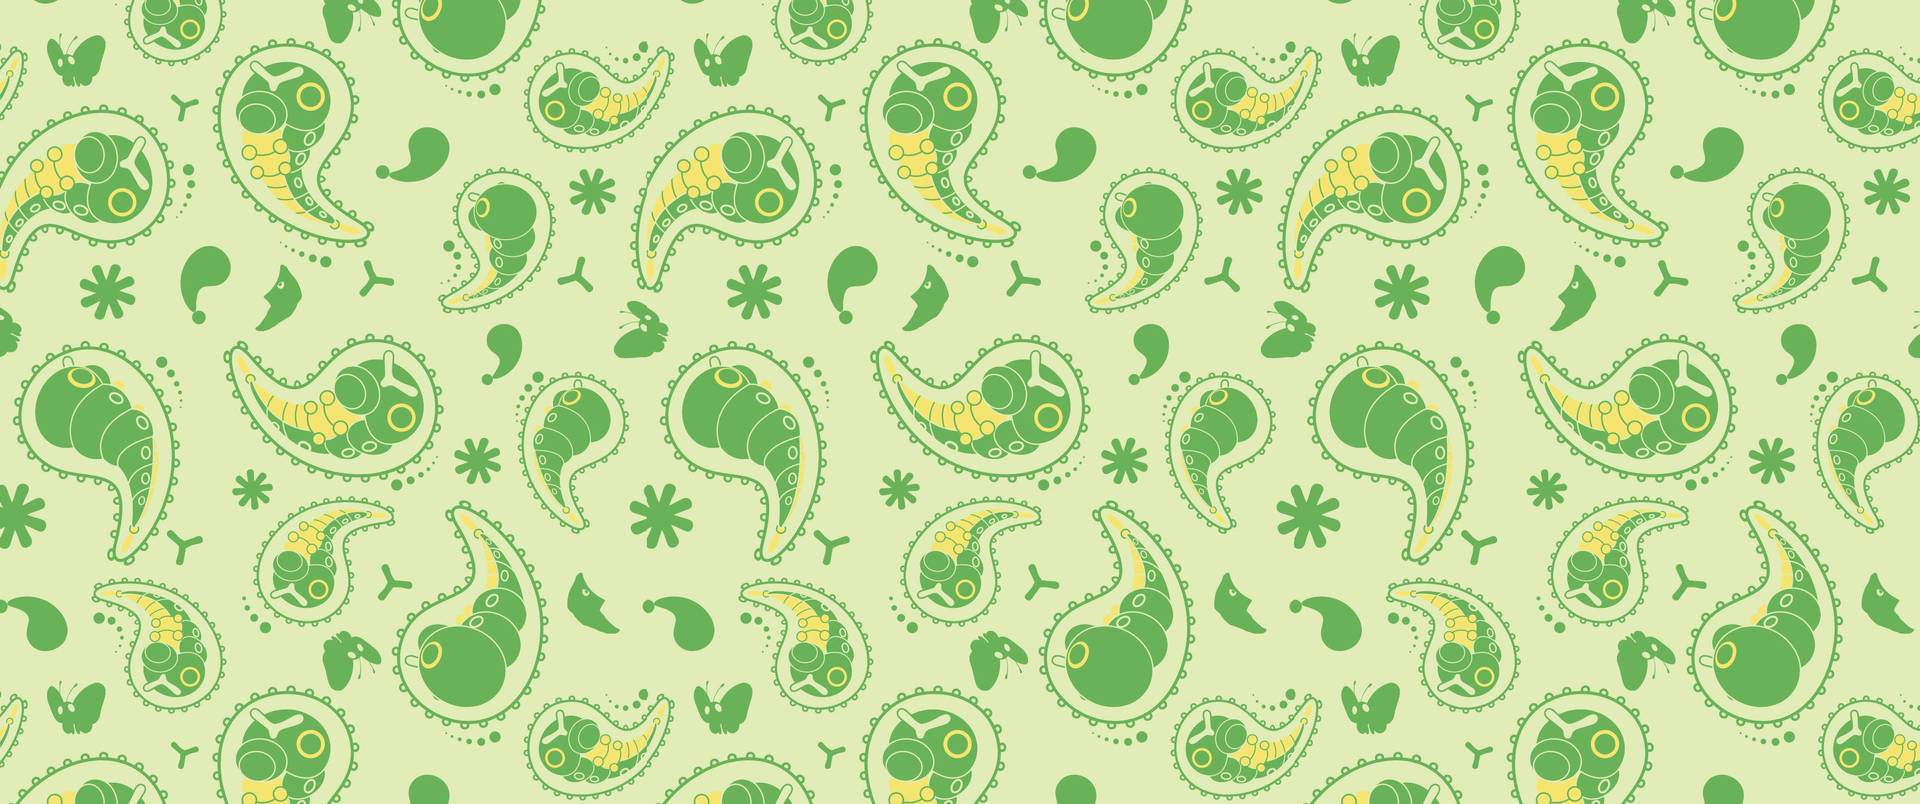 Embrace your inner child with this adorable Caterpie Pokemon pattern! Wallpaper